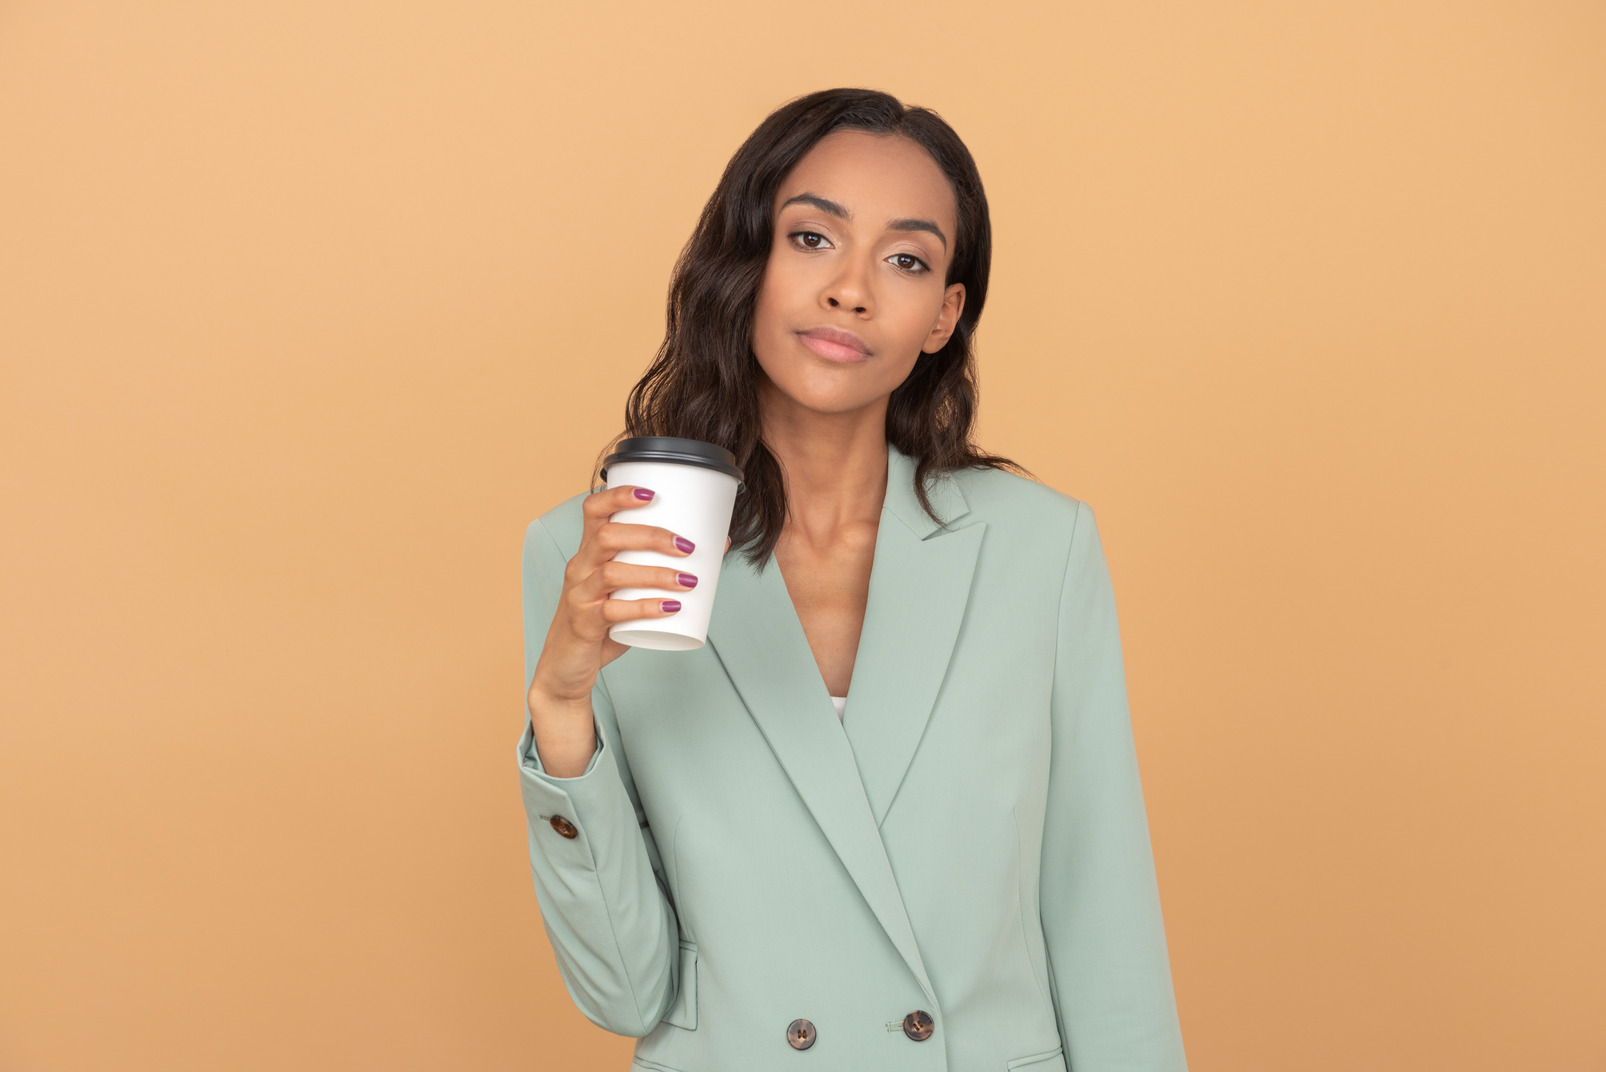 Confident young businesswoman holding a cup of coffee